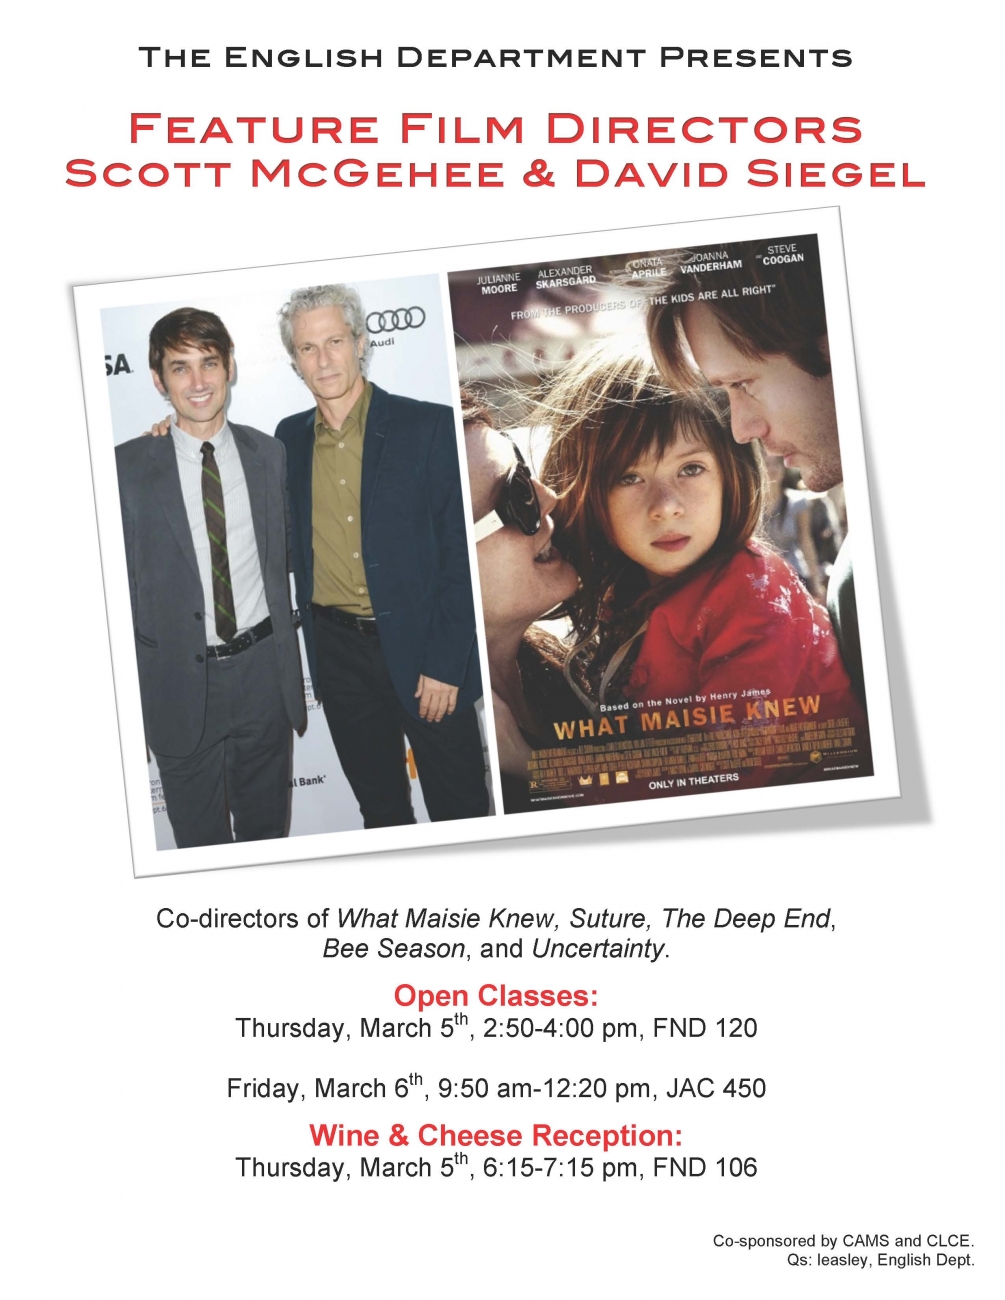 The English Department Presents Feature Film Directors Scott McGehee and David Siegel